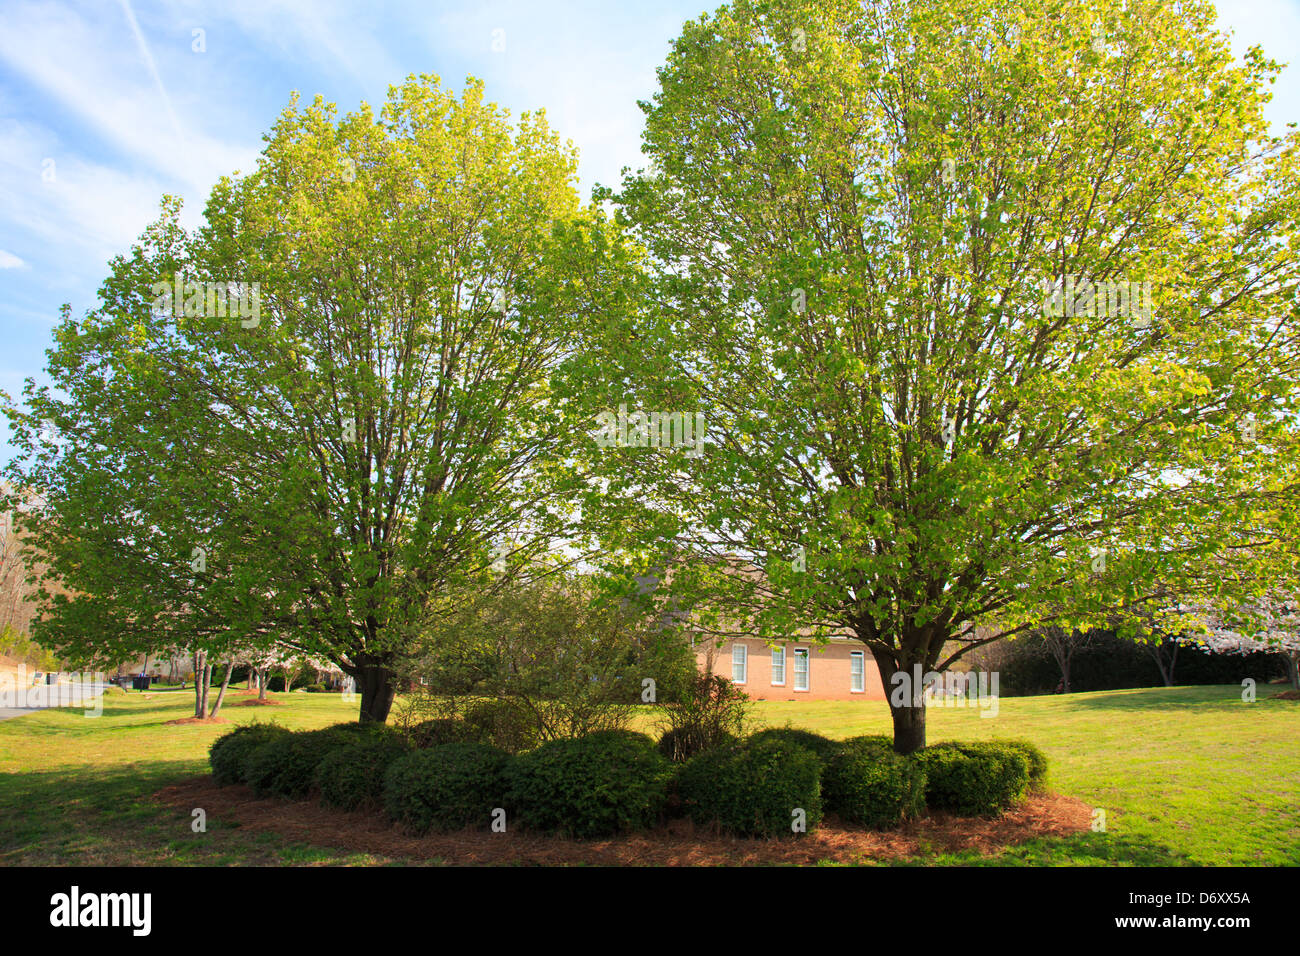 Landscaping in the spring of a typical American Suburban neiborhood. Stock Photo